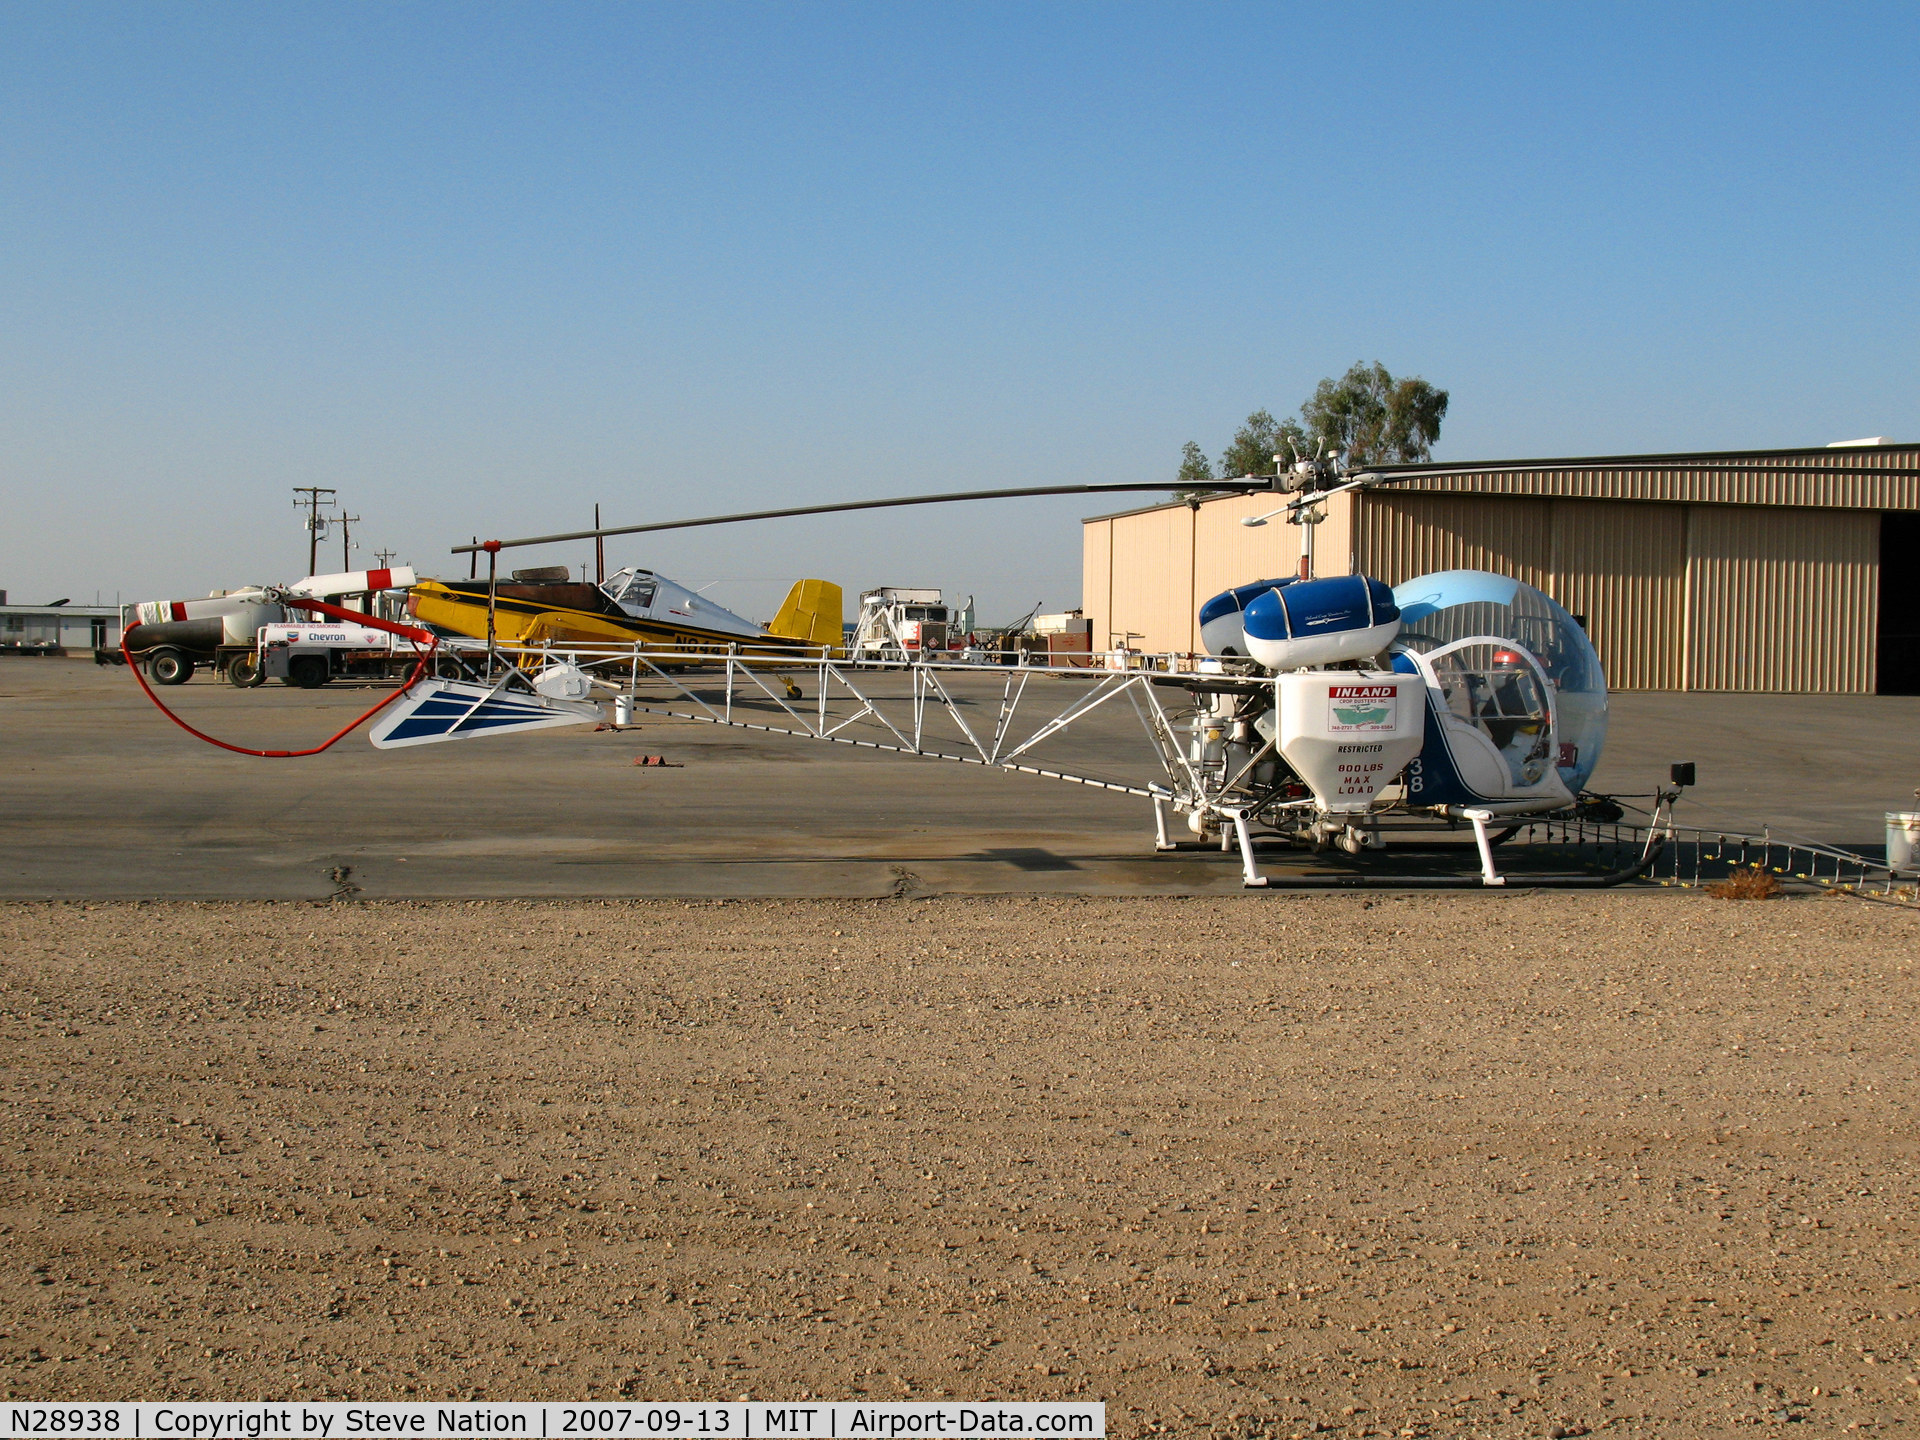 N28938, 1970 Bell 47G-4A C/N 7728, Inland Crop Dusters 1970 Bell 47G-4A as sprayer and in non-standard colors @ Shafter, CA